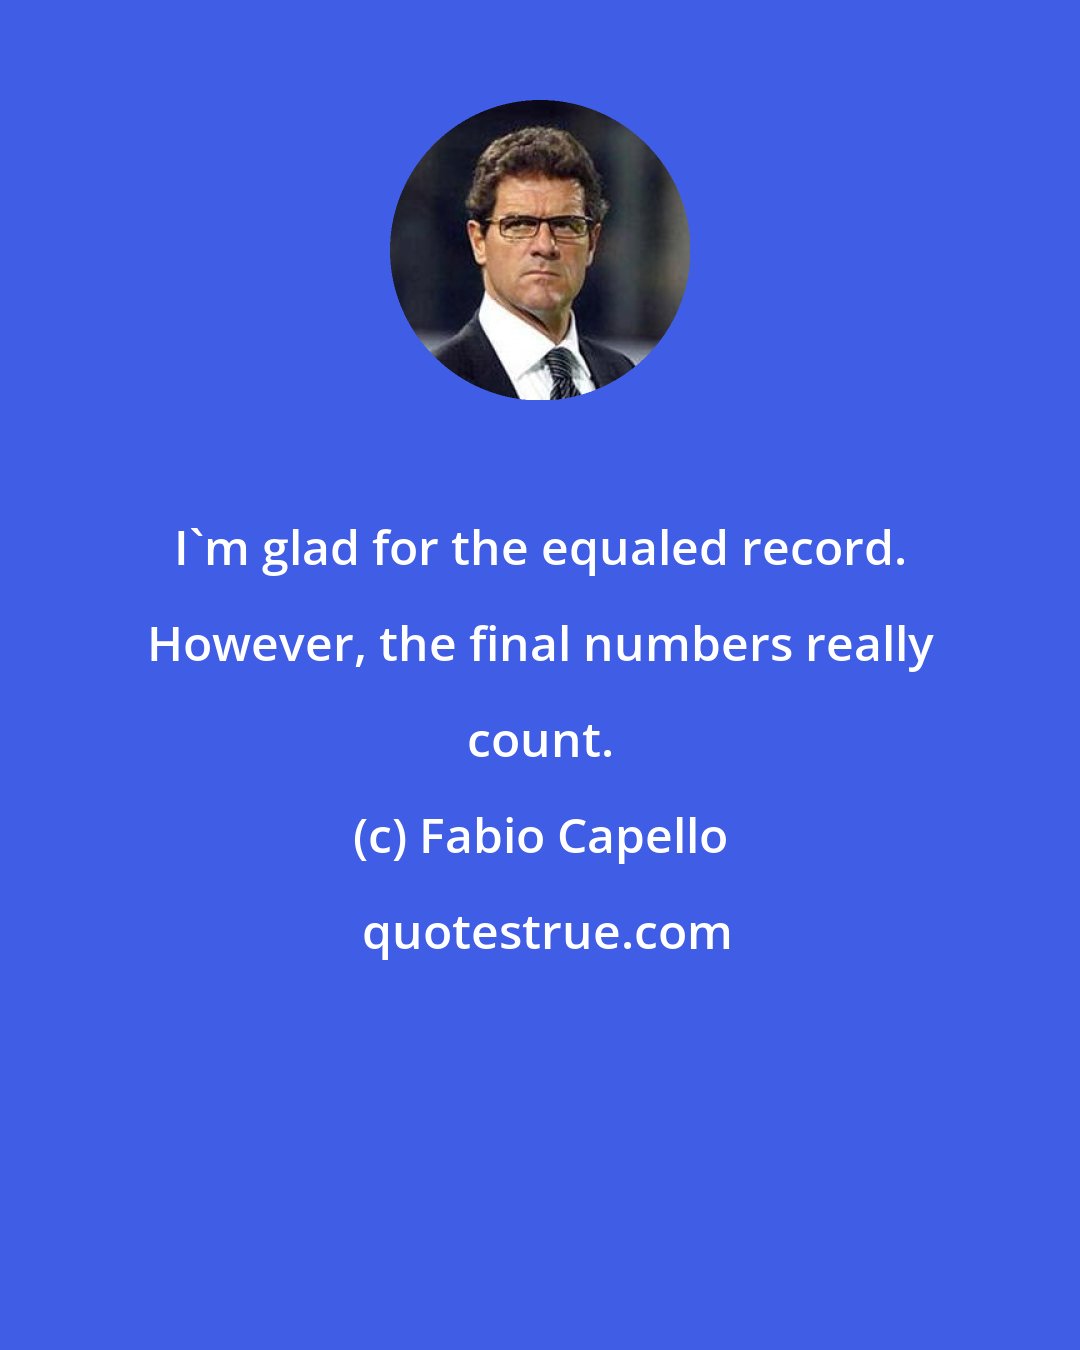 Fabio Capello: I'm glad for the equaled record. However, the final numbers really count.